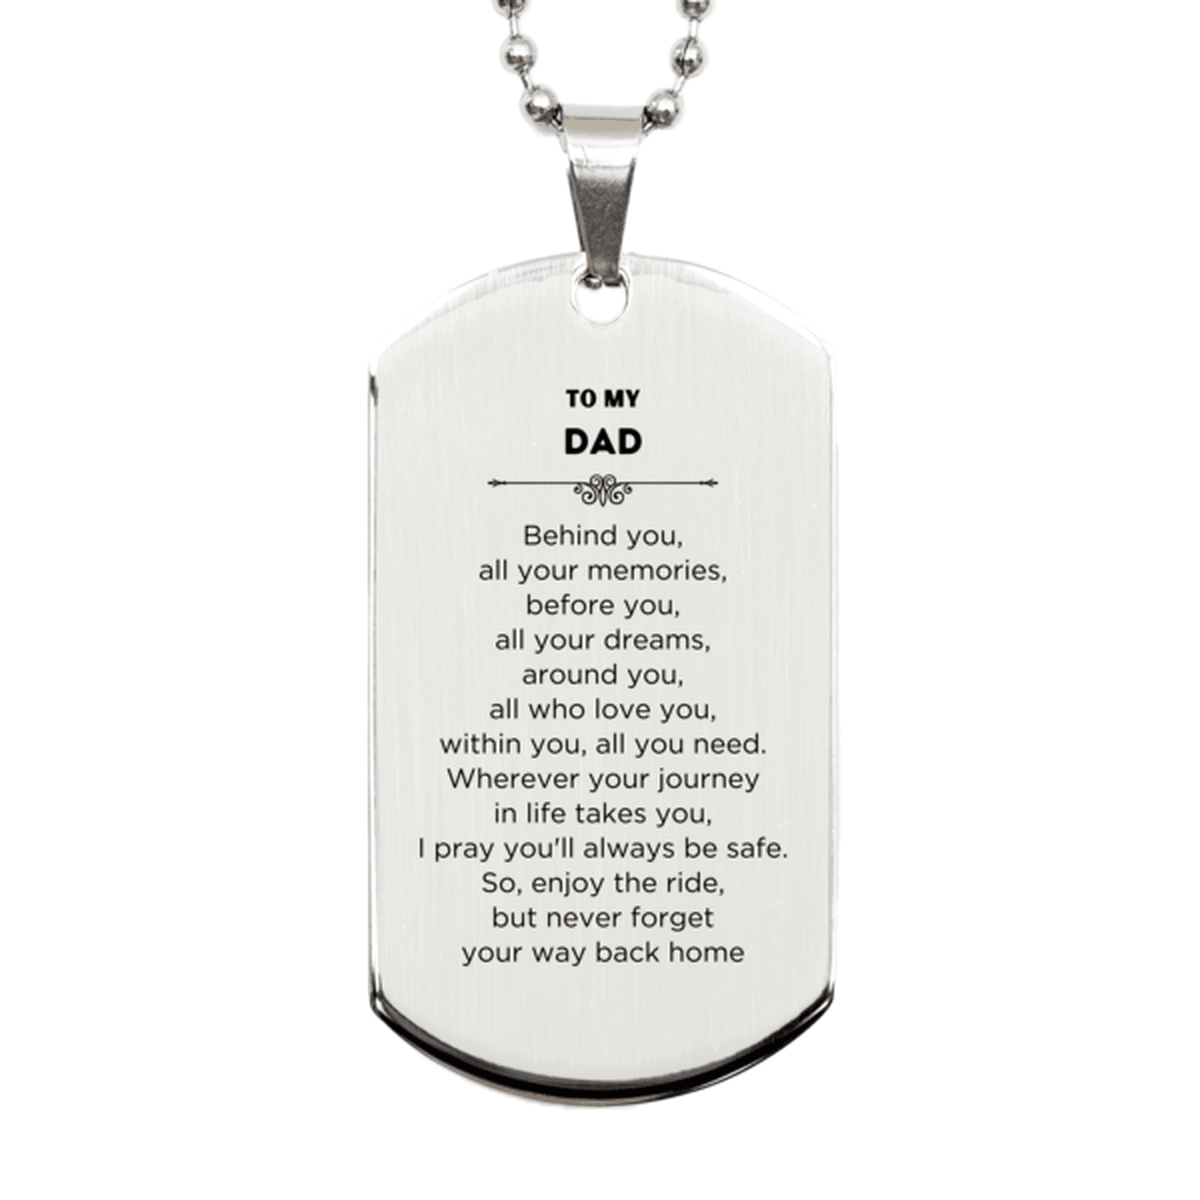 Dad Silver Dog Tag Necklace Bracelet Birthday Christmas Unique Gifts Behind you, all your memories, before you, all your dreams - Mallard Moon Gift Shop